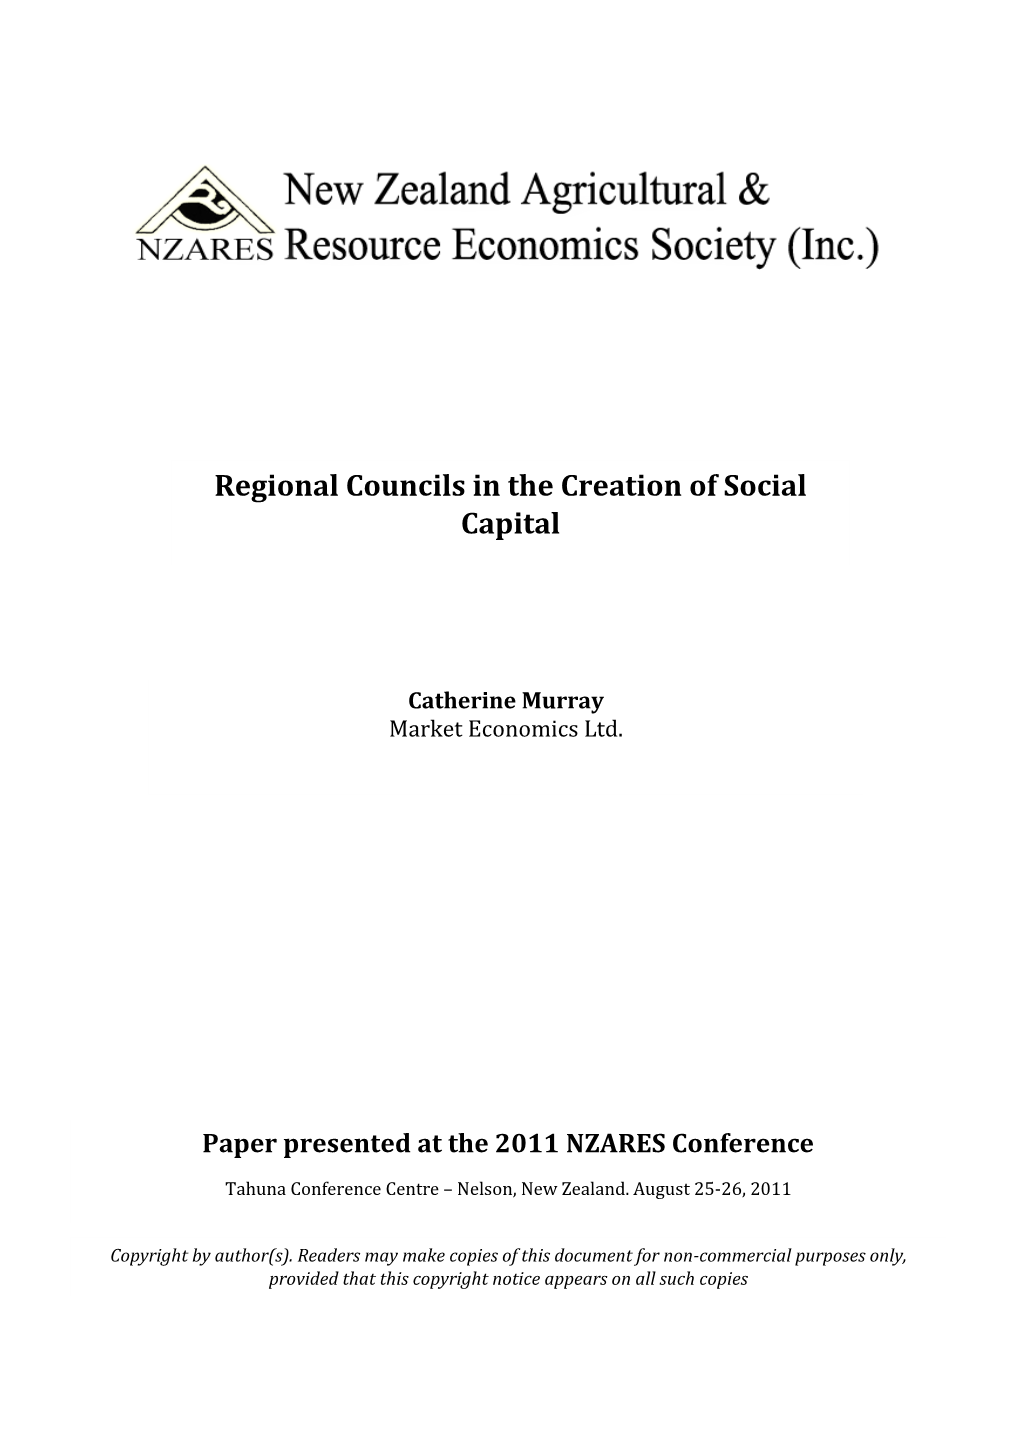 Economics Policy and Regional Councils